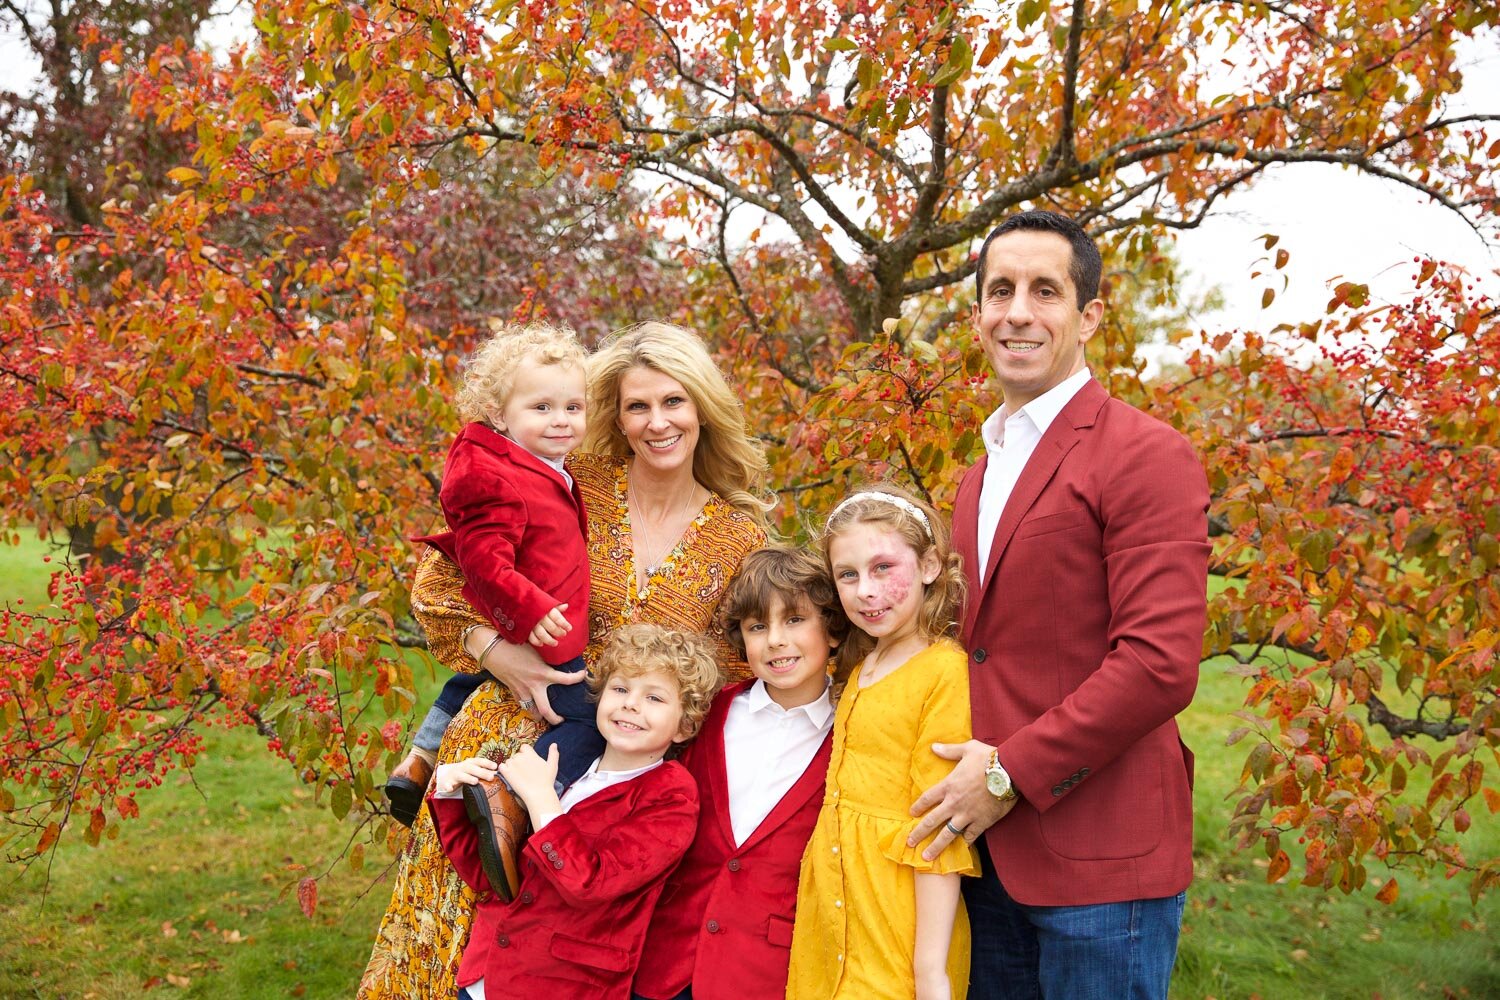 Family of six wearing autumn tones posed in front of vibrant fall foliage in Chanhassen Minnesota